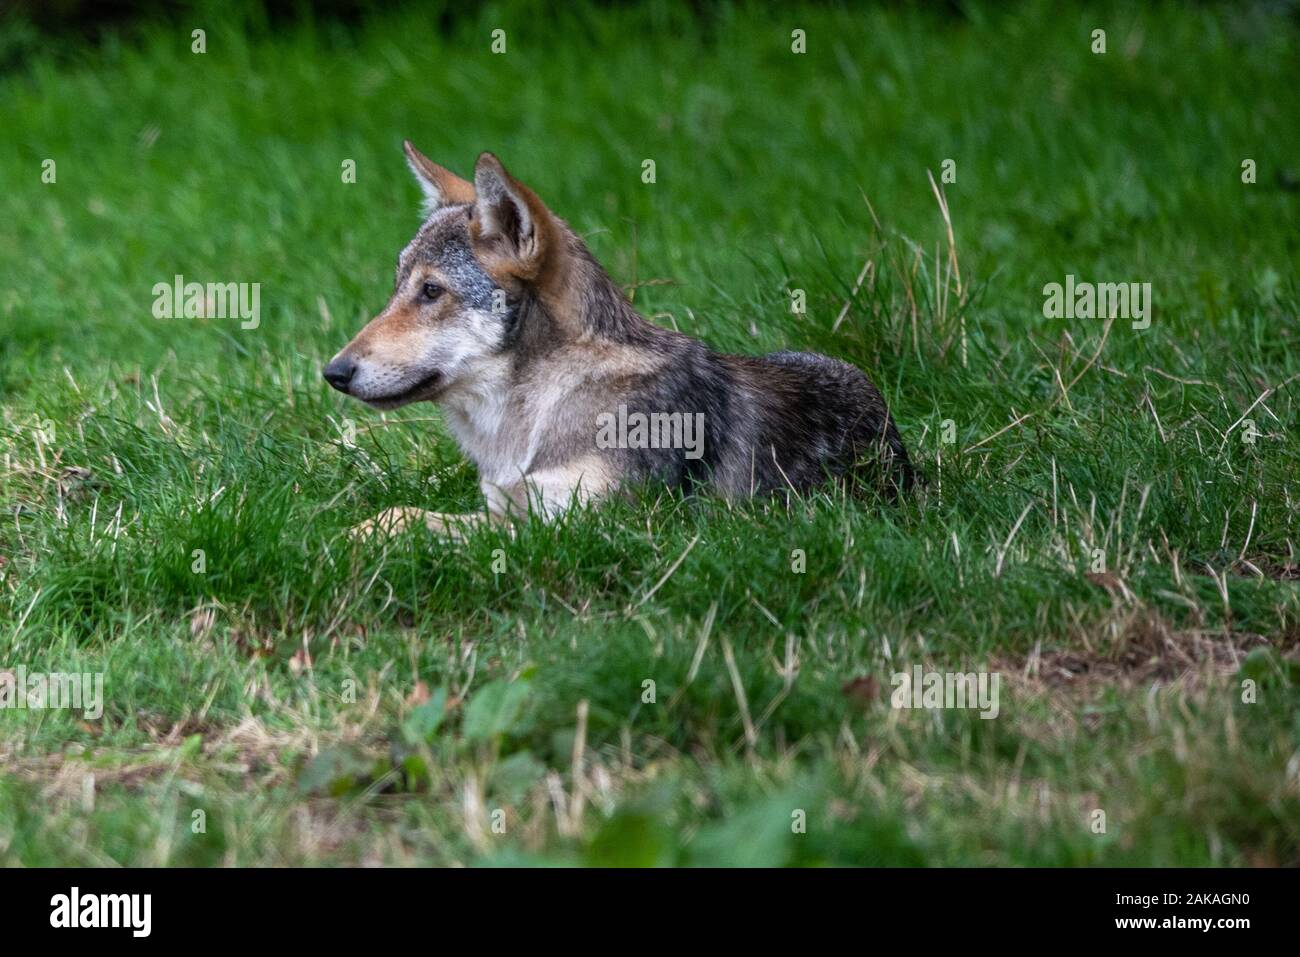 A grey wolf keeps watch in the grass Stock Photo